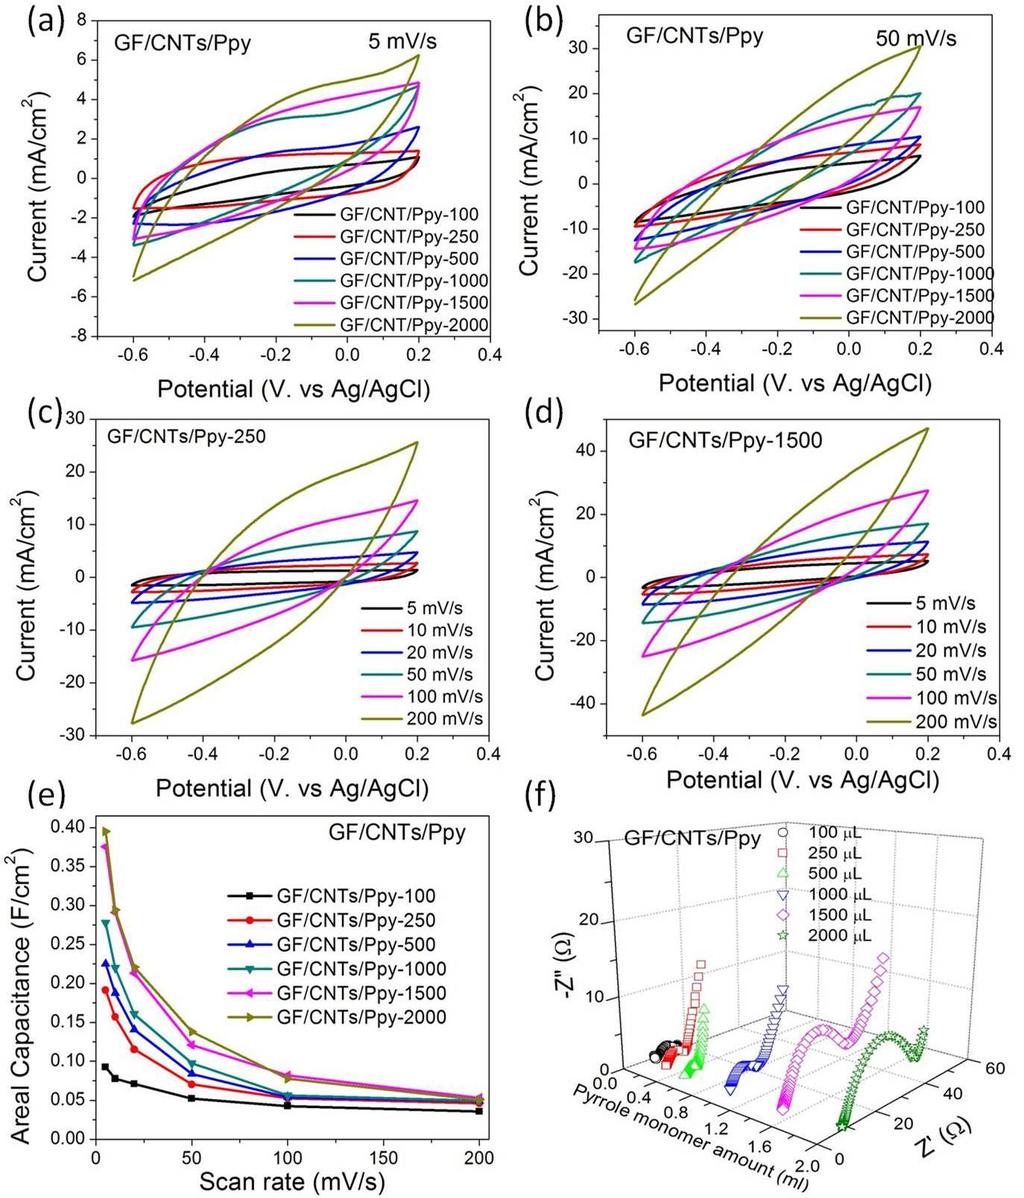 Fig. S16 Comparative CV curves of GF/CNTs/Ppy hybrid films at scan rates of (a) 5 mv/s and (b) 50 mv/s.